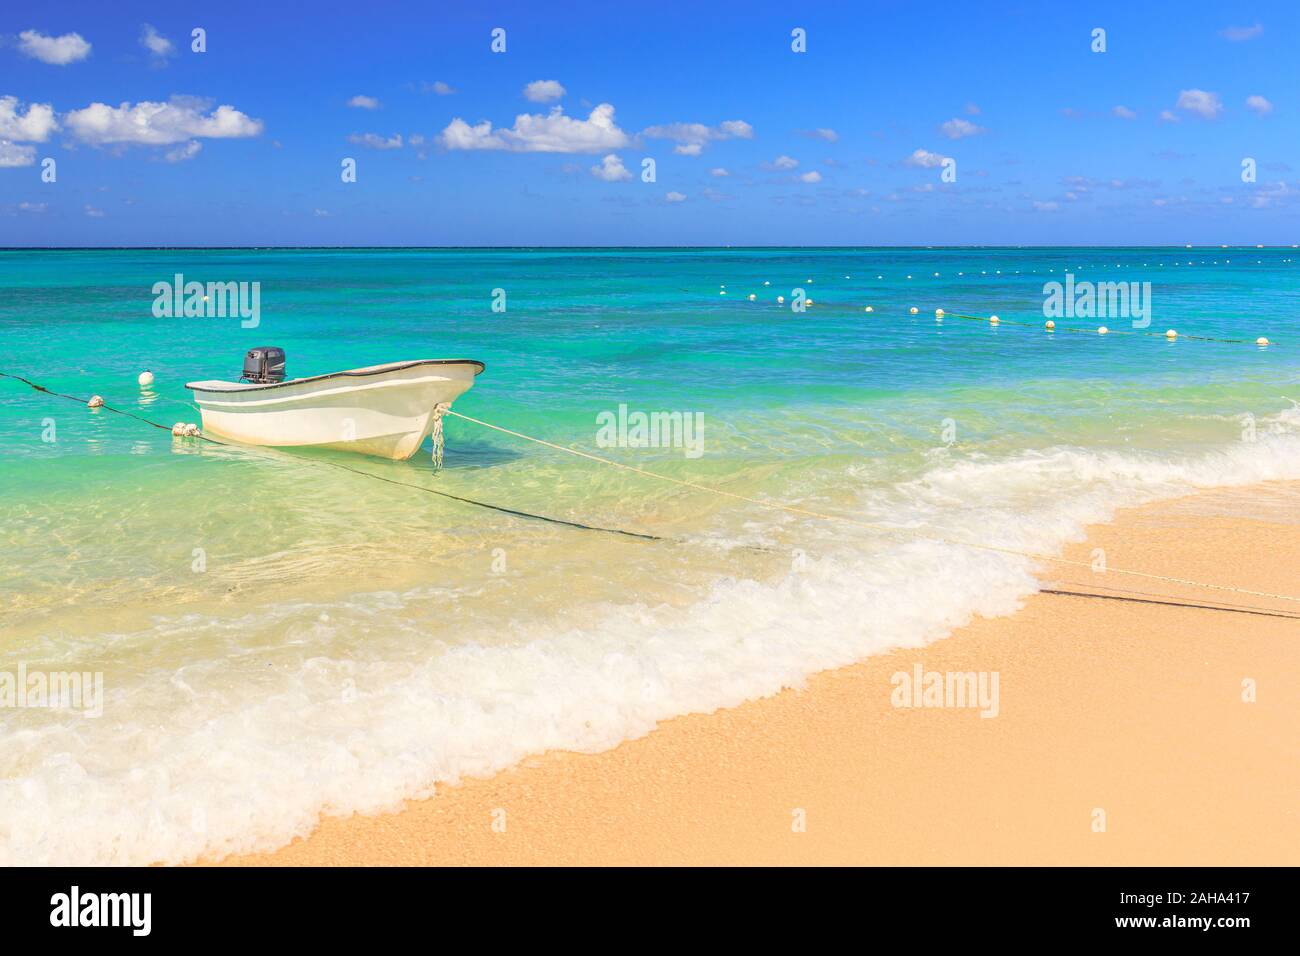 Boat on a beach in Montego Bay Jamaica Stock Photo